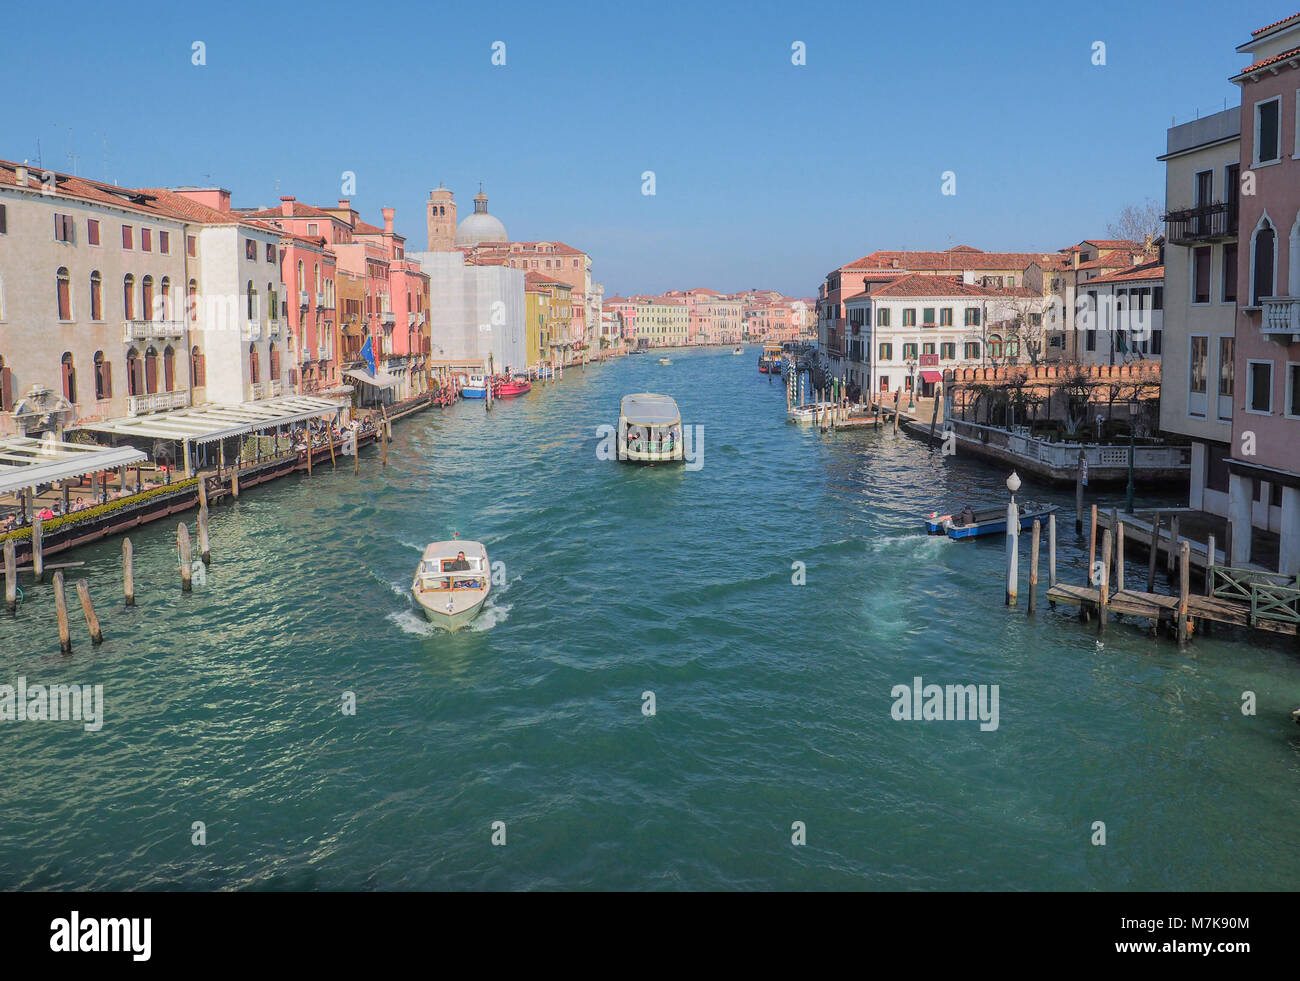 the Grand Canal (Canal Grande), famous all over the world for the princely palaces that overlook it. Venice, Italy Stock Photo